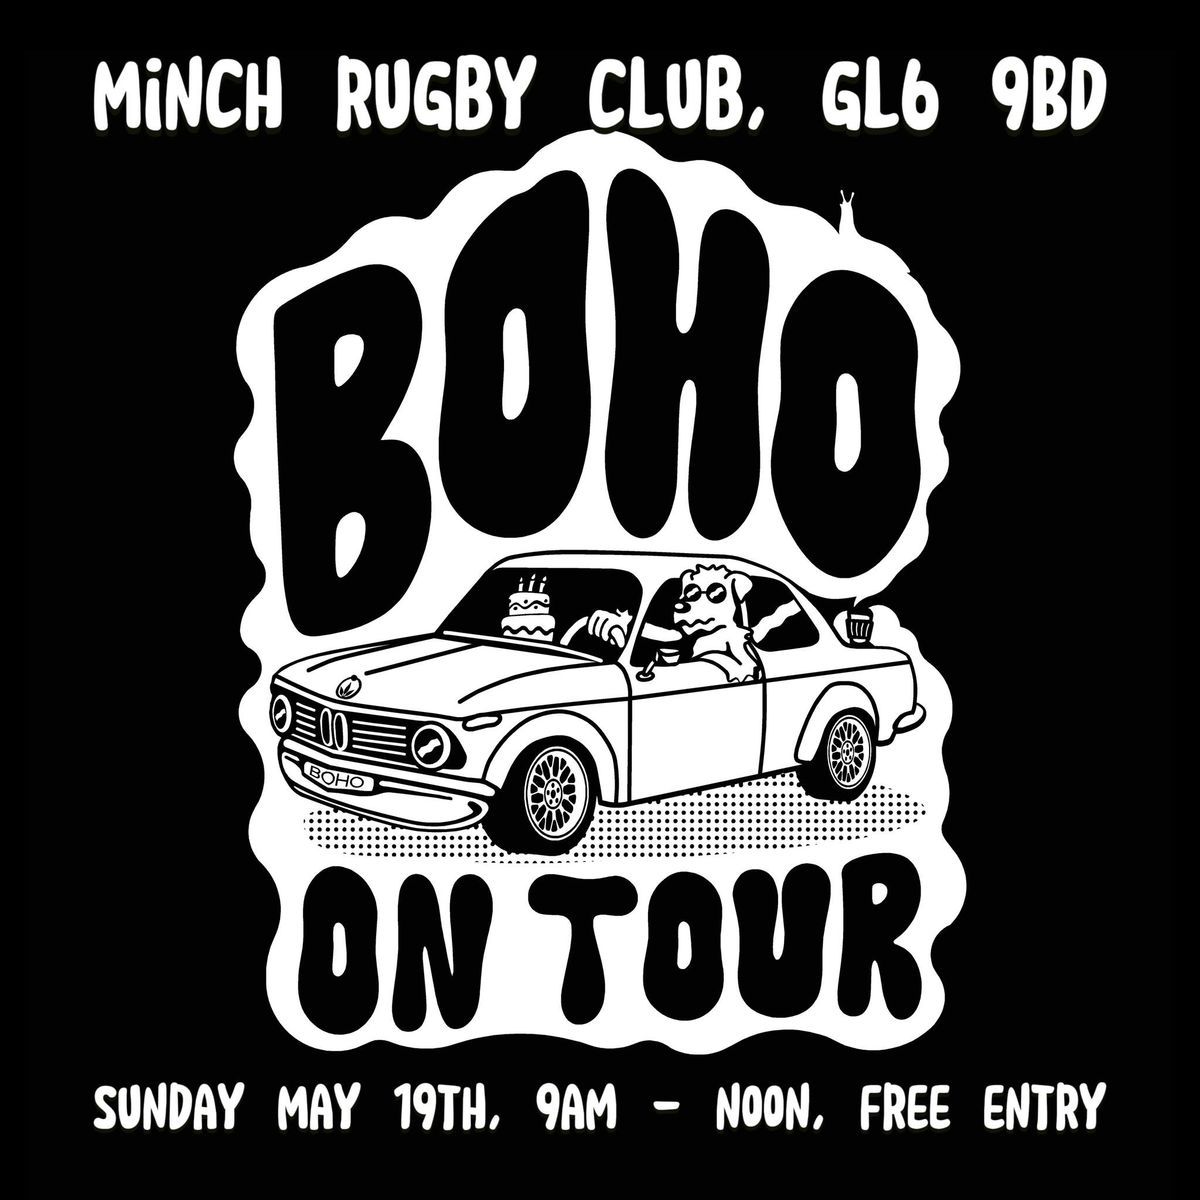 Monthly car meet at Minch Rugby Club